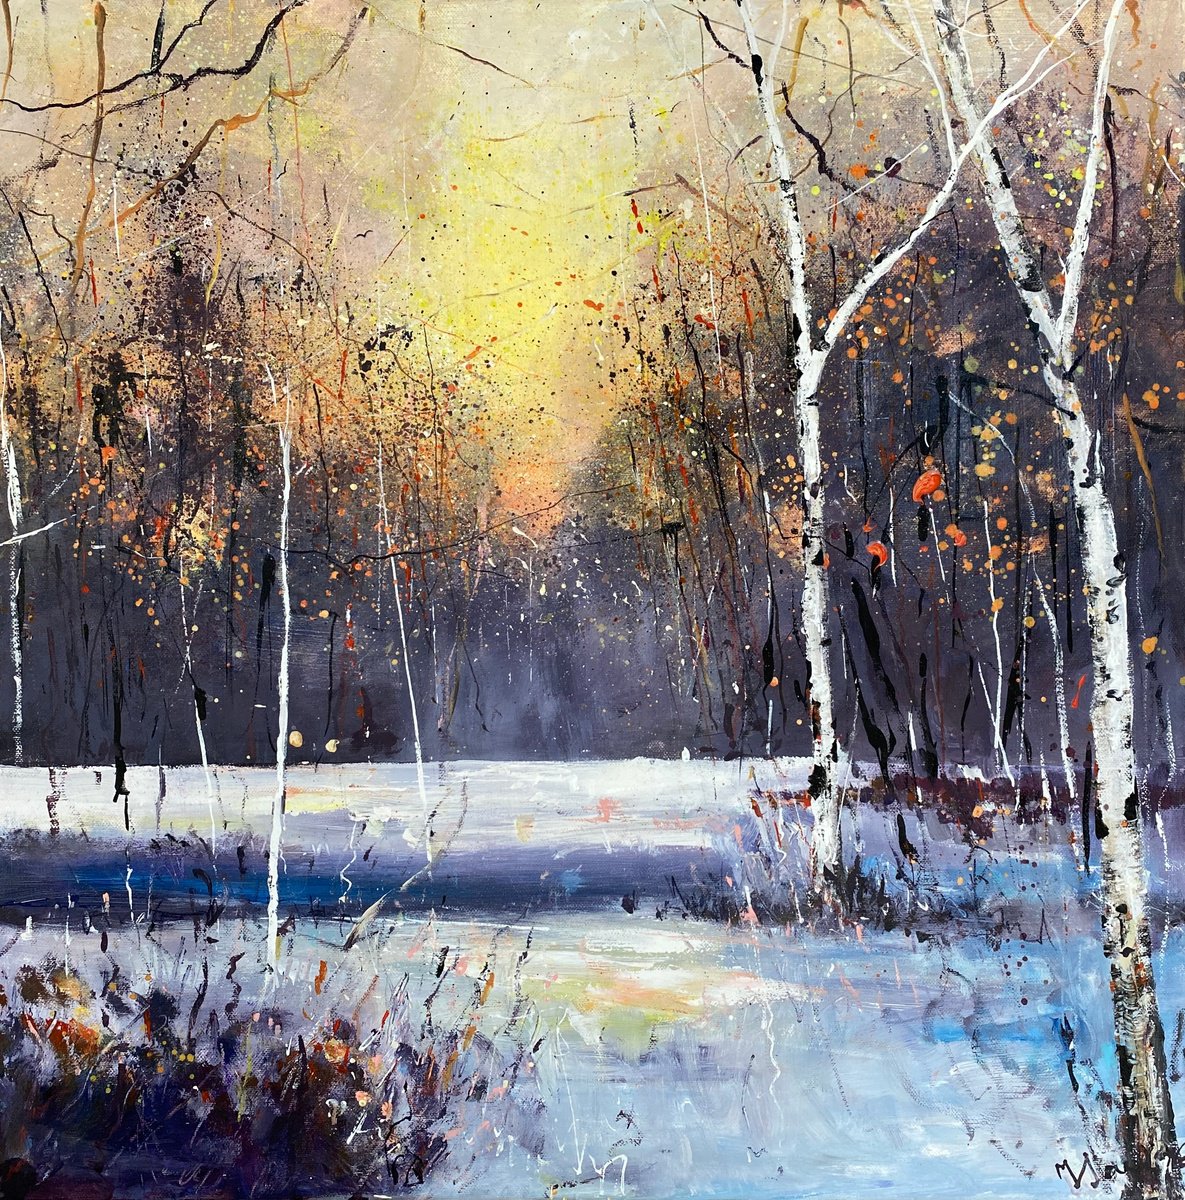 Silver Birches Bright Winter Day by Teresa Tanner